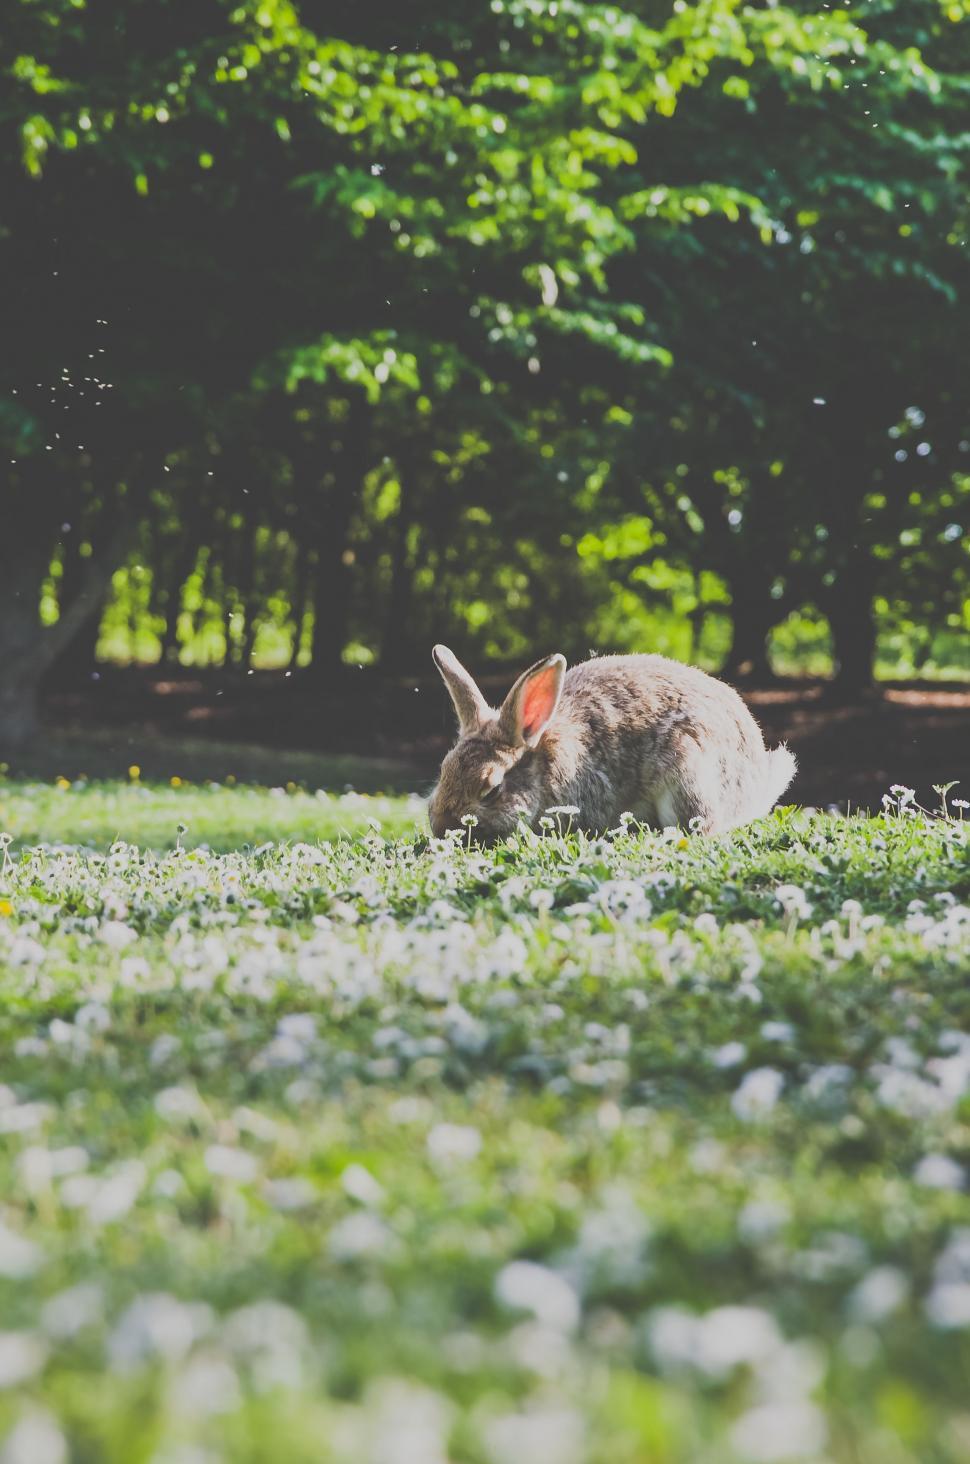 Free Image of Rabbit in Grass Field With Background Trees 